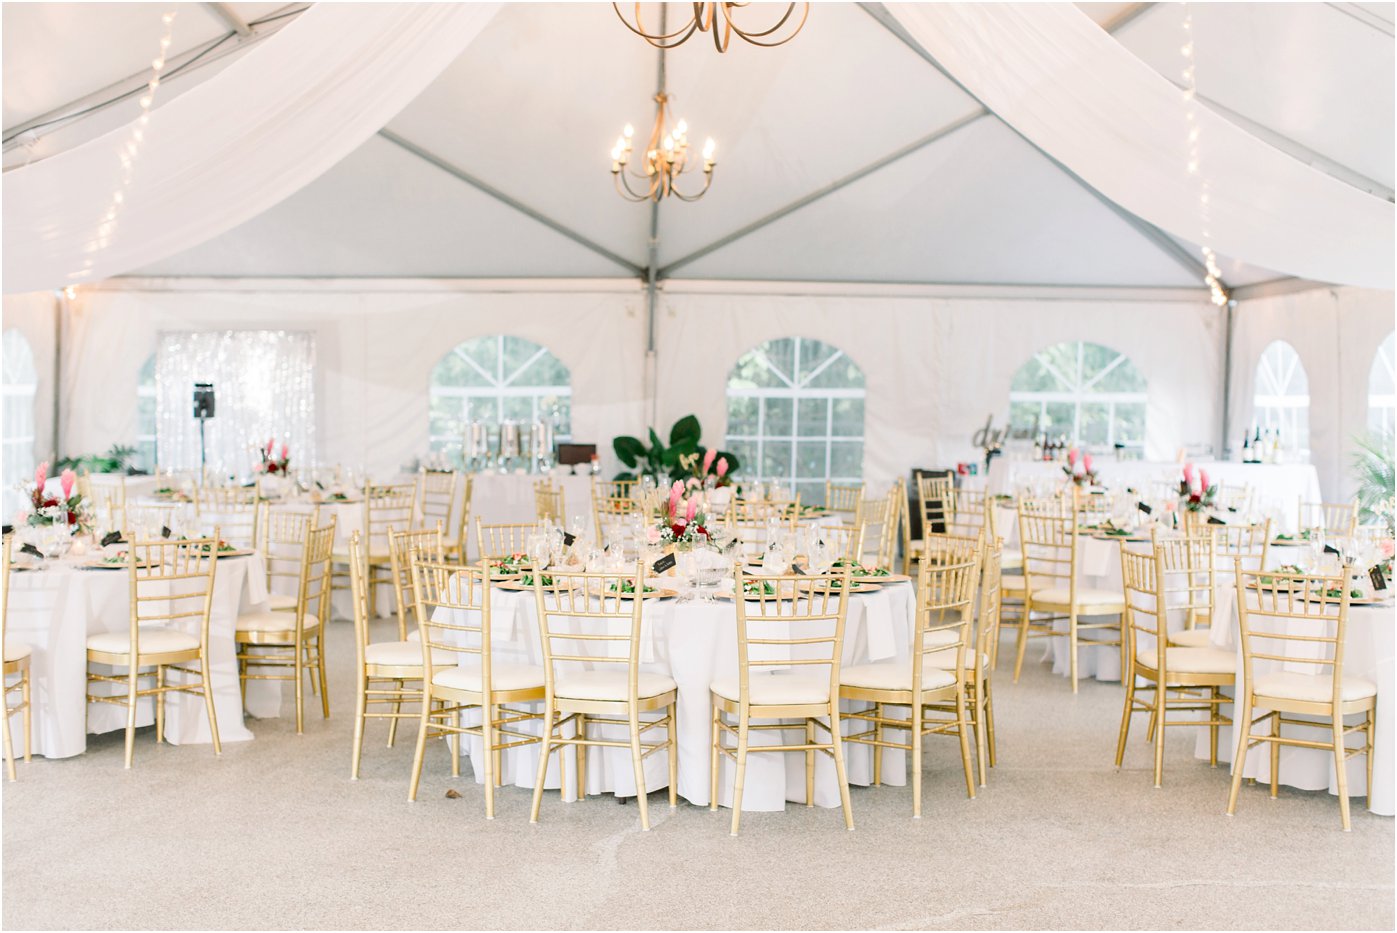 A tent wedding reception with gold chair accents at Rust Manor House. A beautiful wedding venue in Northern Virginia.